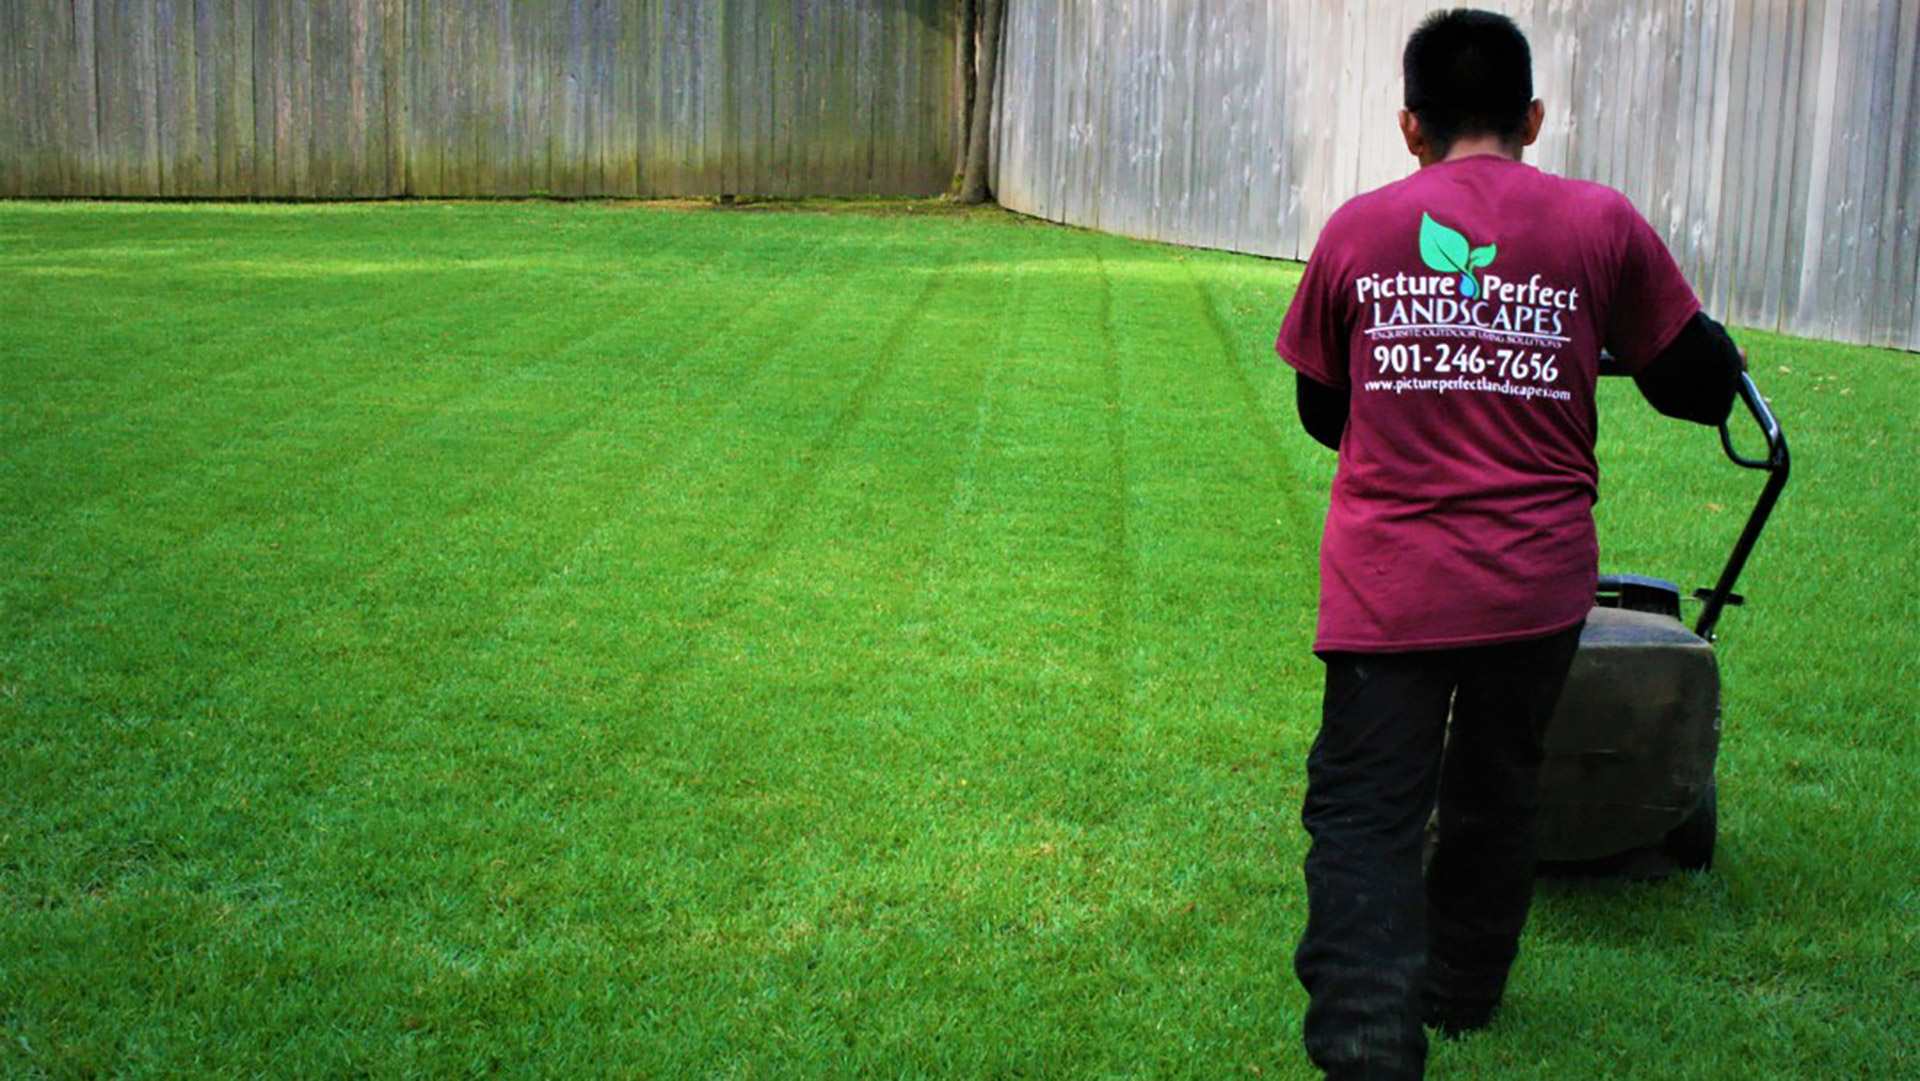 Our landscaper mowing a lawn on a property in Midtown Memphis, TN.